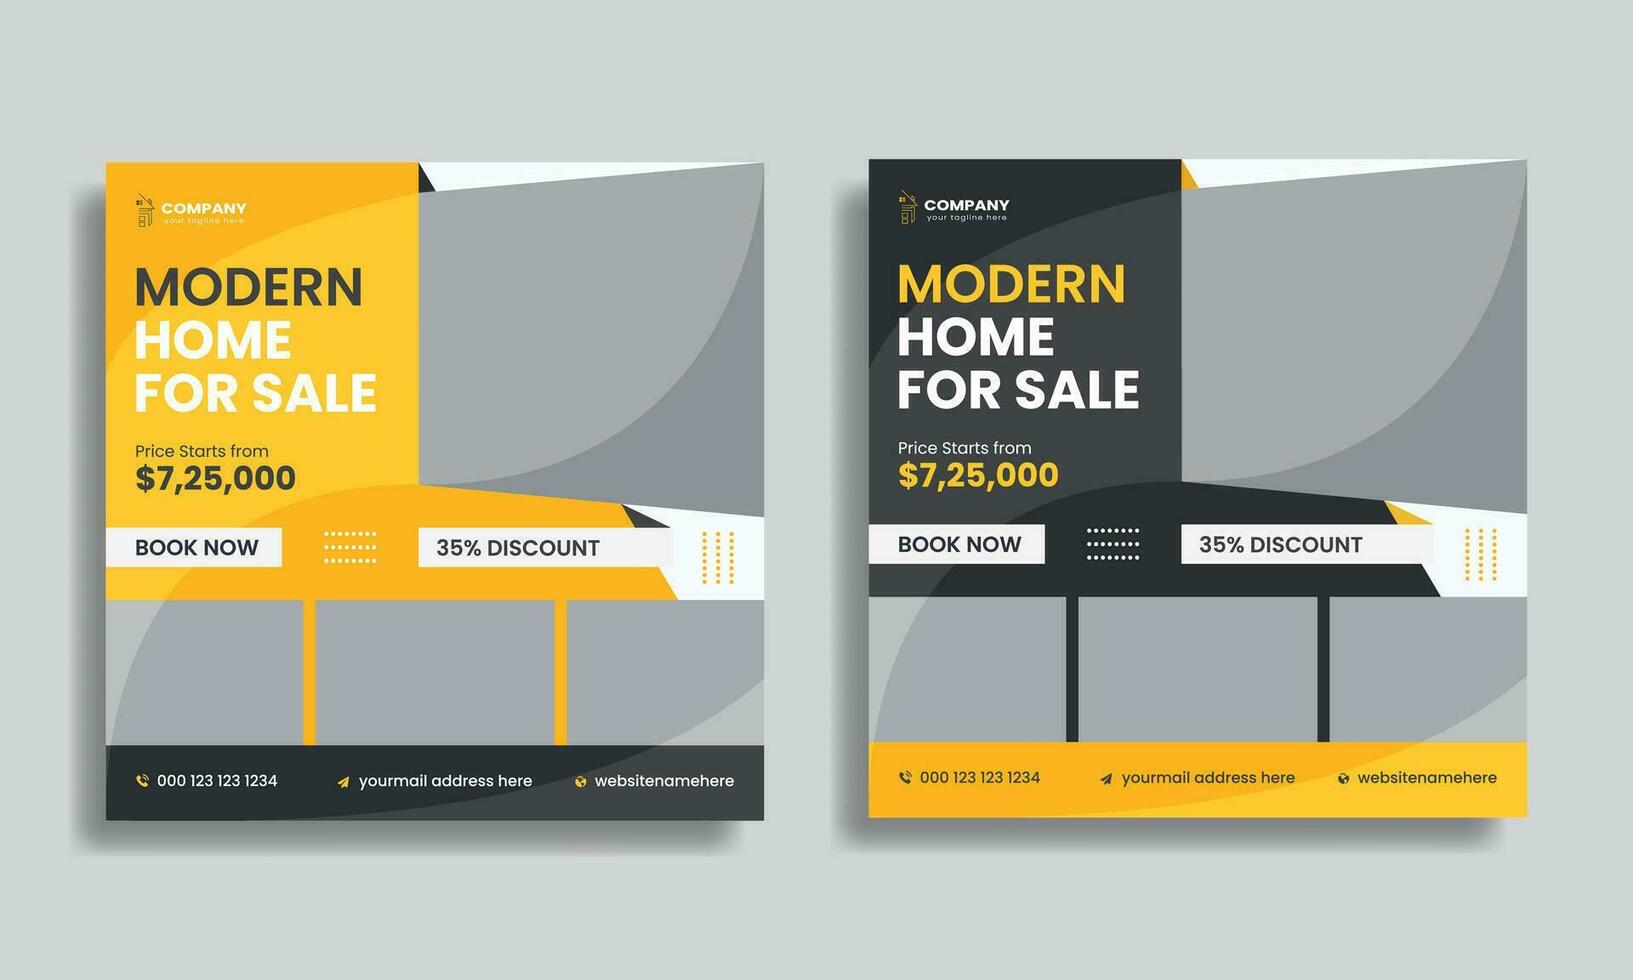 Social media post design template for real estate company, home for sale square banner for digital marketing vector